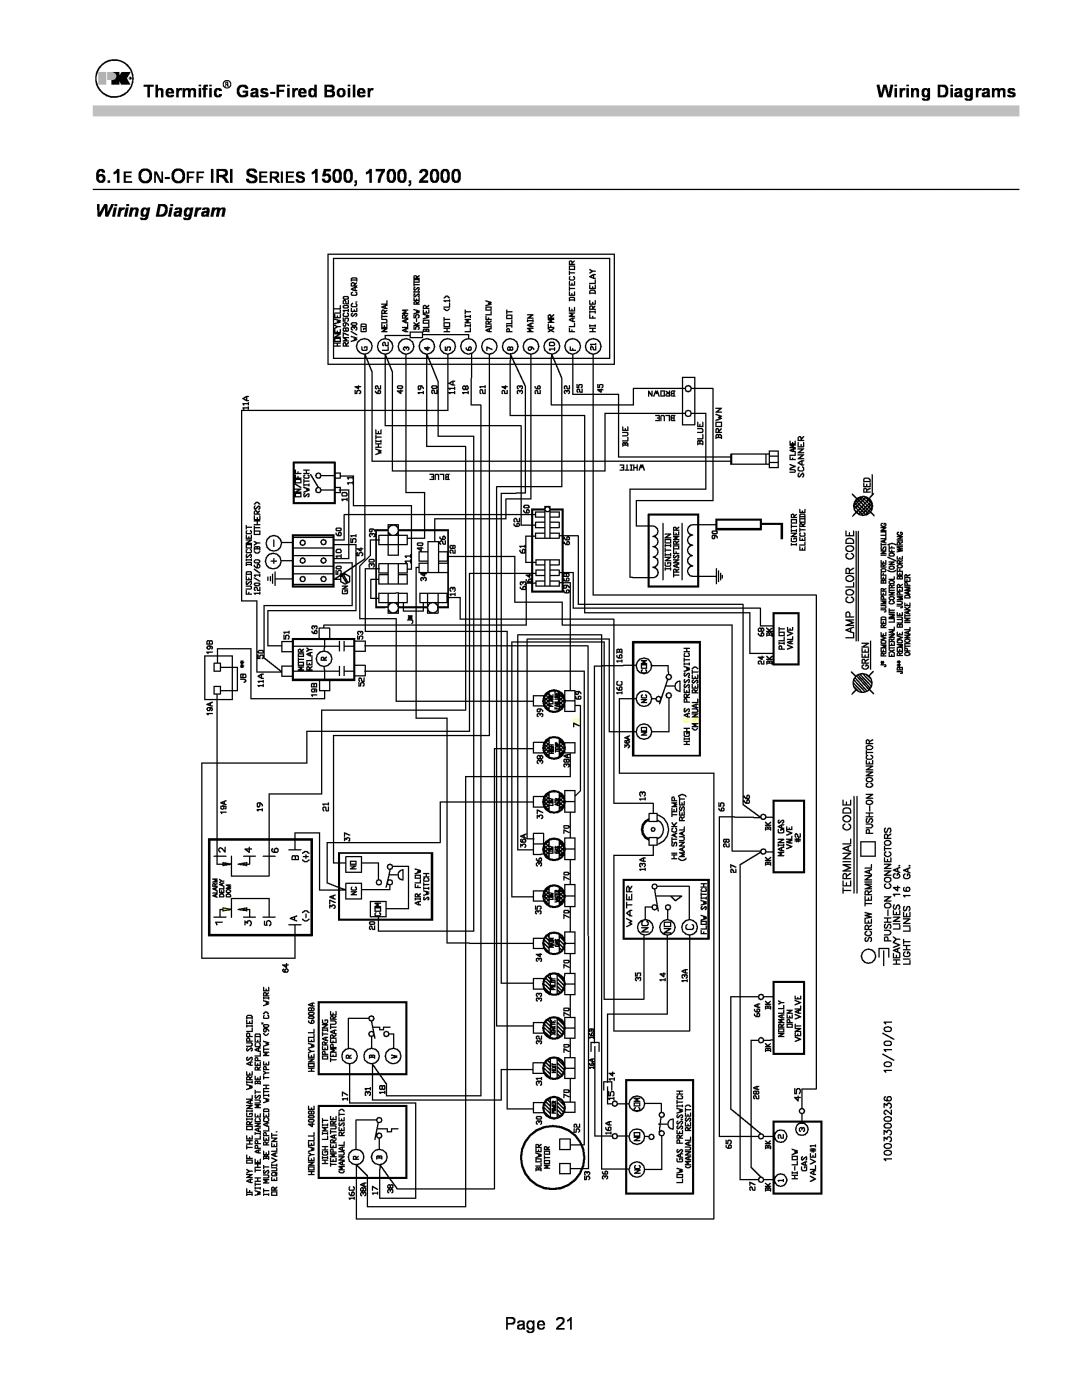 Patterson-Kelley DVSCM-02 owner manual 6.1E ON-OFF IRI SERIES, Thermific Gas-FiredBoiler, Wiring Diagrams 